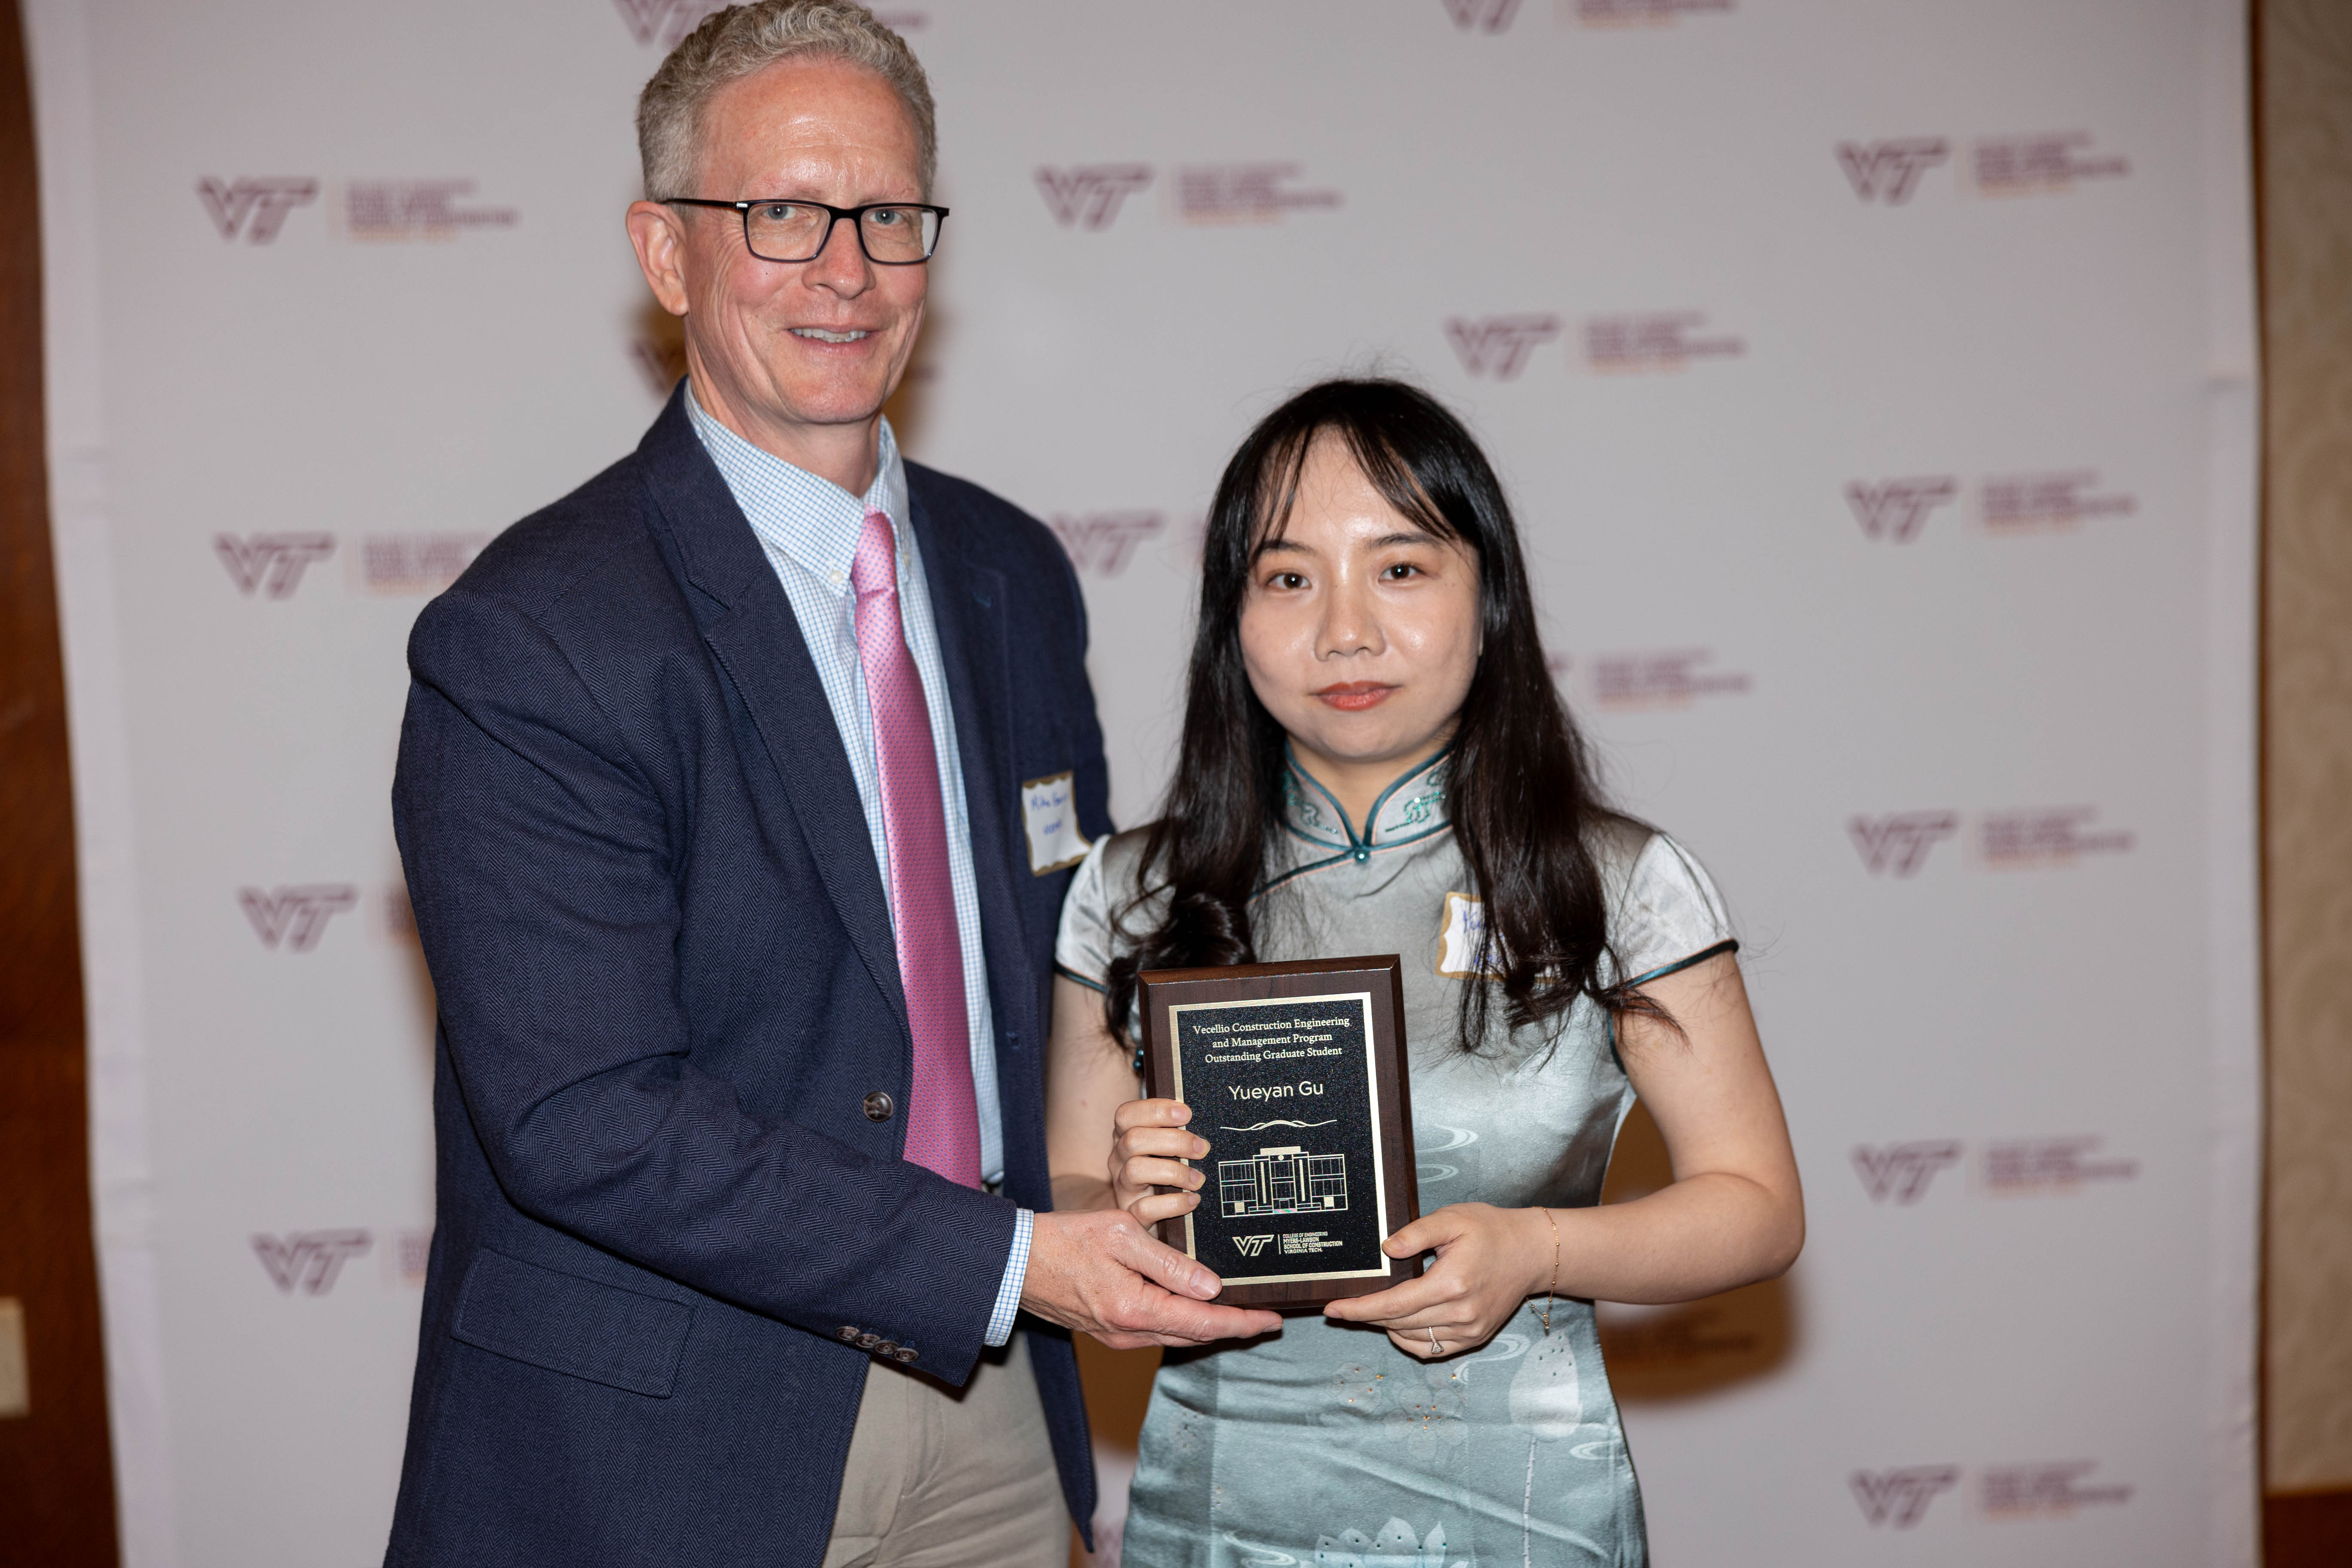 Michael Garvin (at left) with Yueyan Gu. Photo by Will Drew for Virginia Tech.